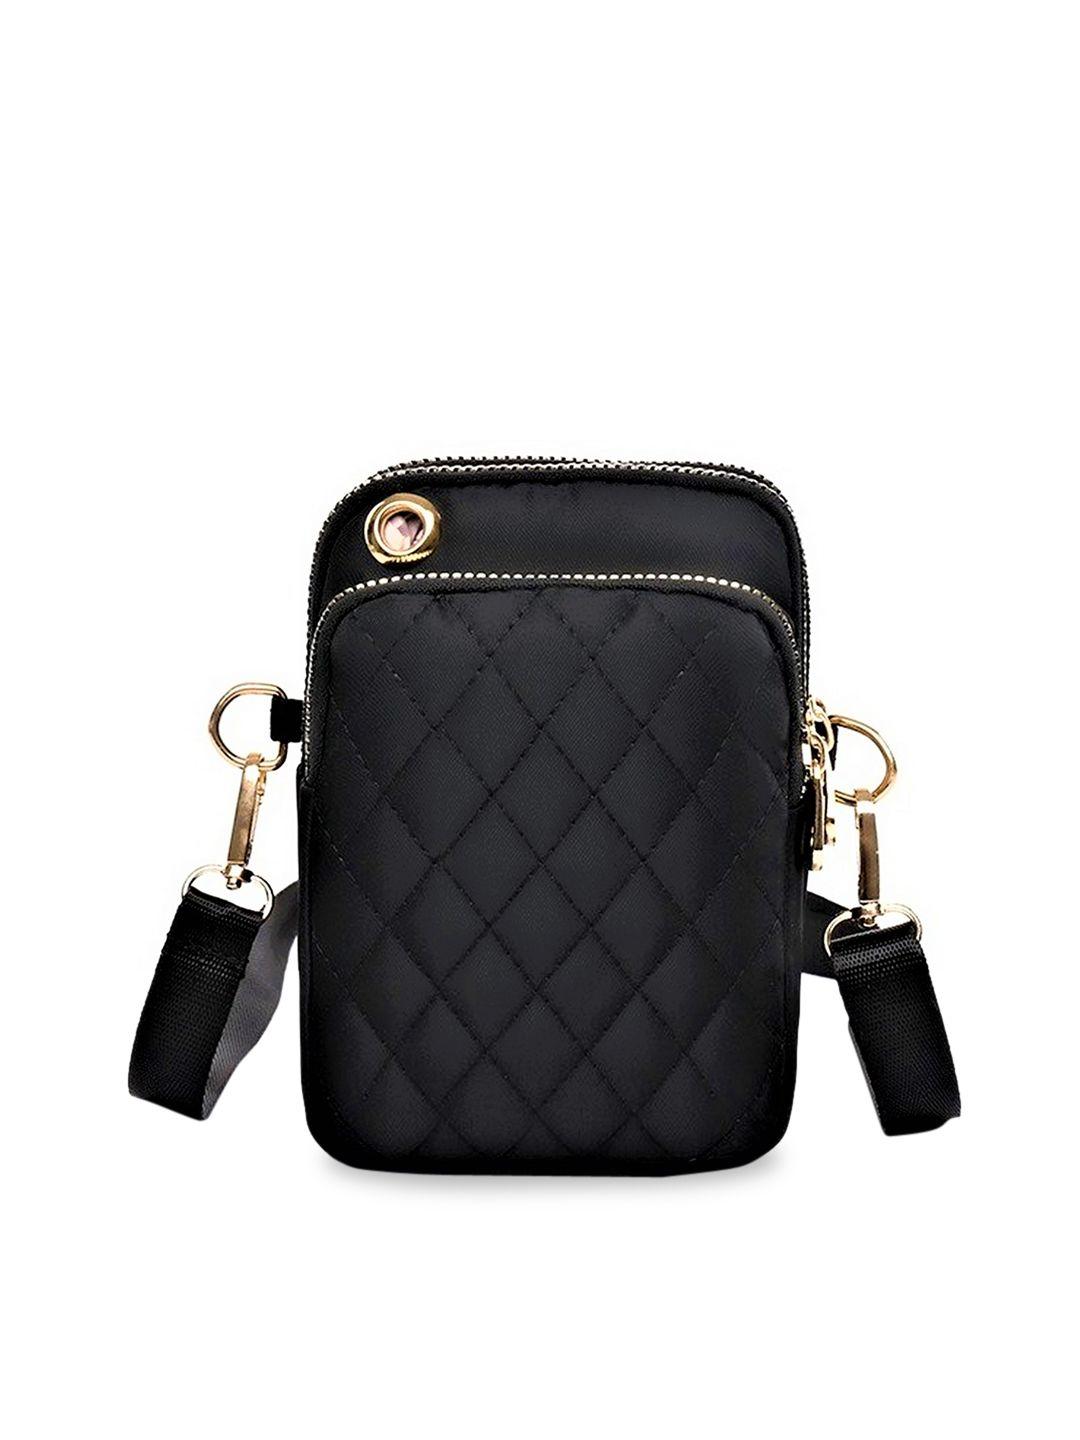 diva dale black textured structured sling bag with quilted